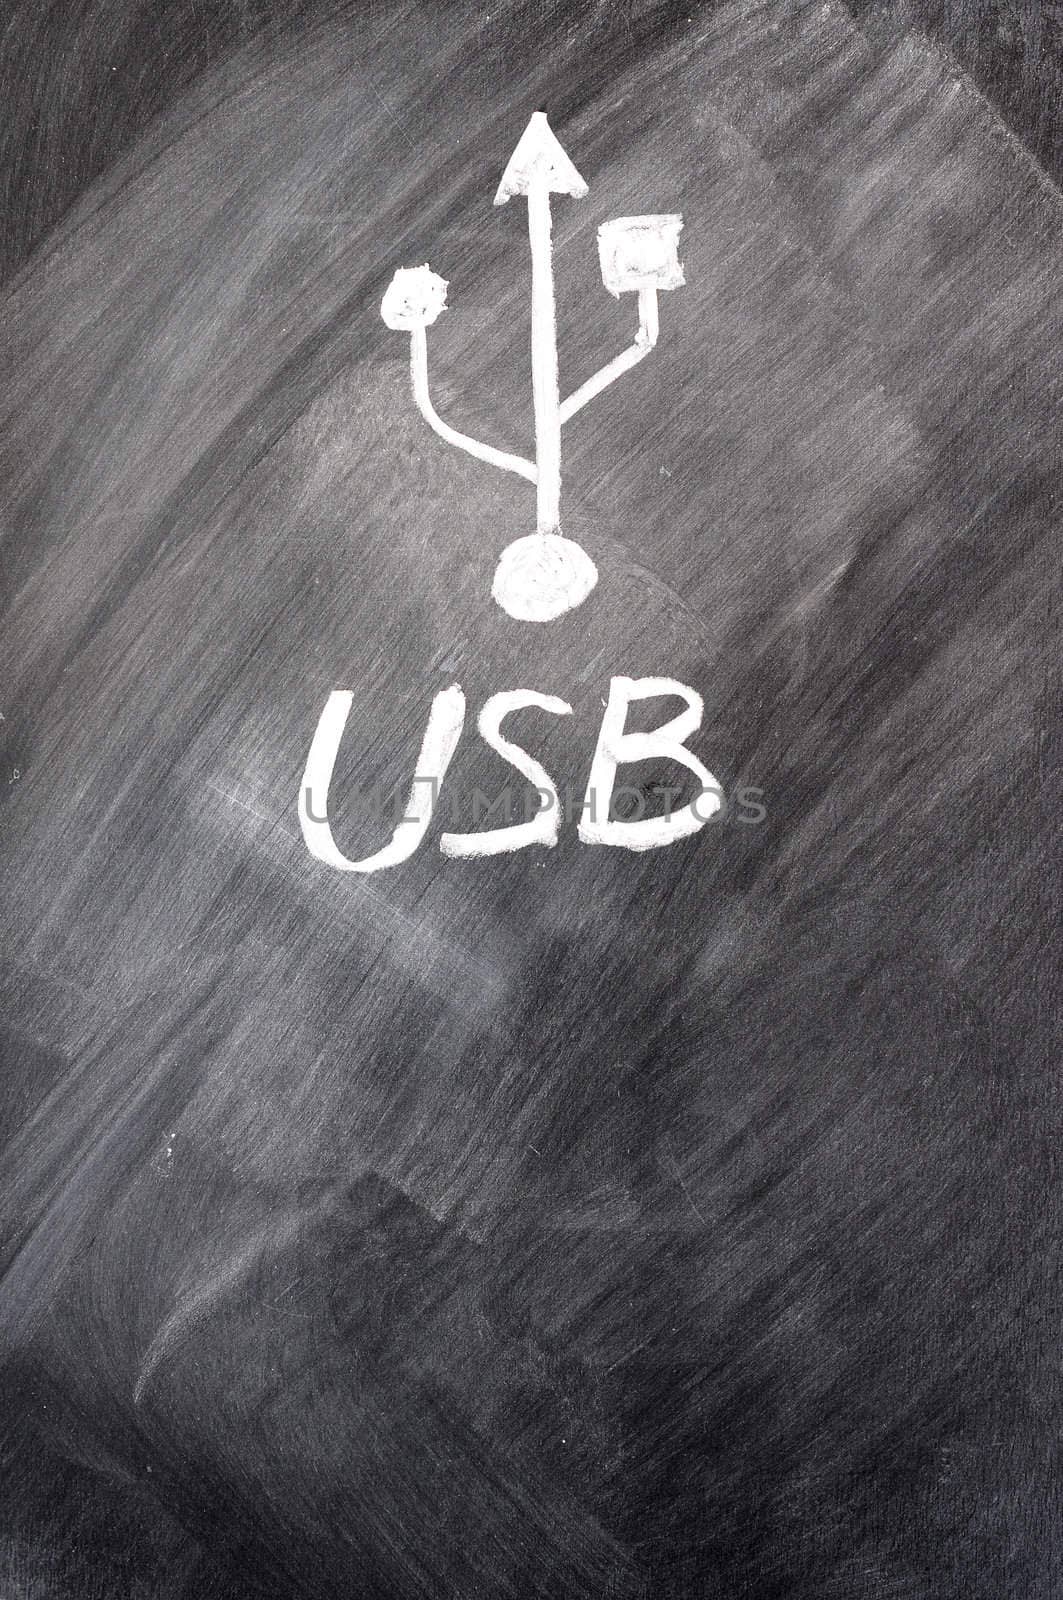 Abstract USB sign drawn on a blackboard 